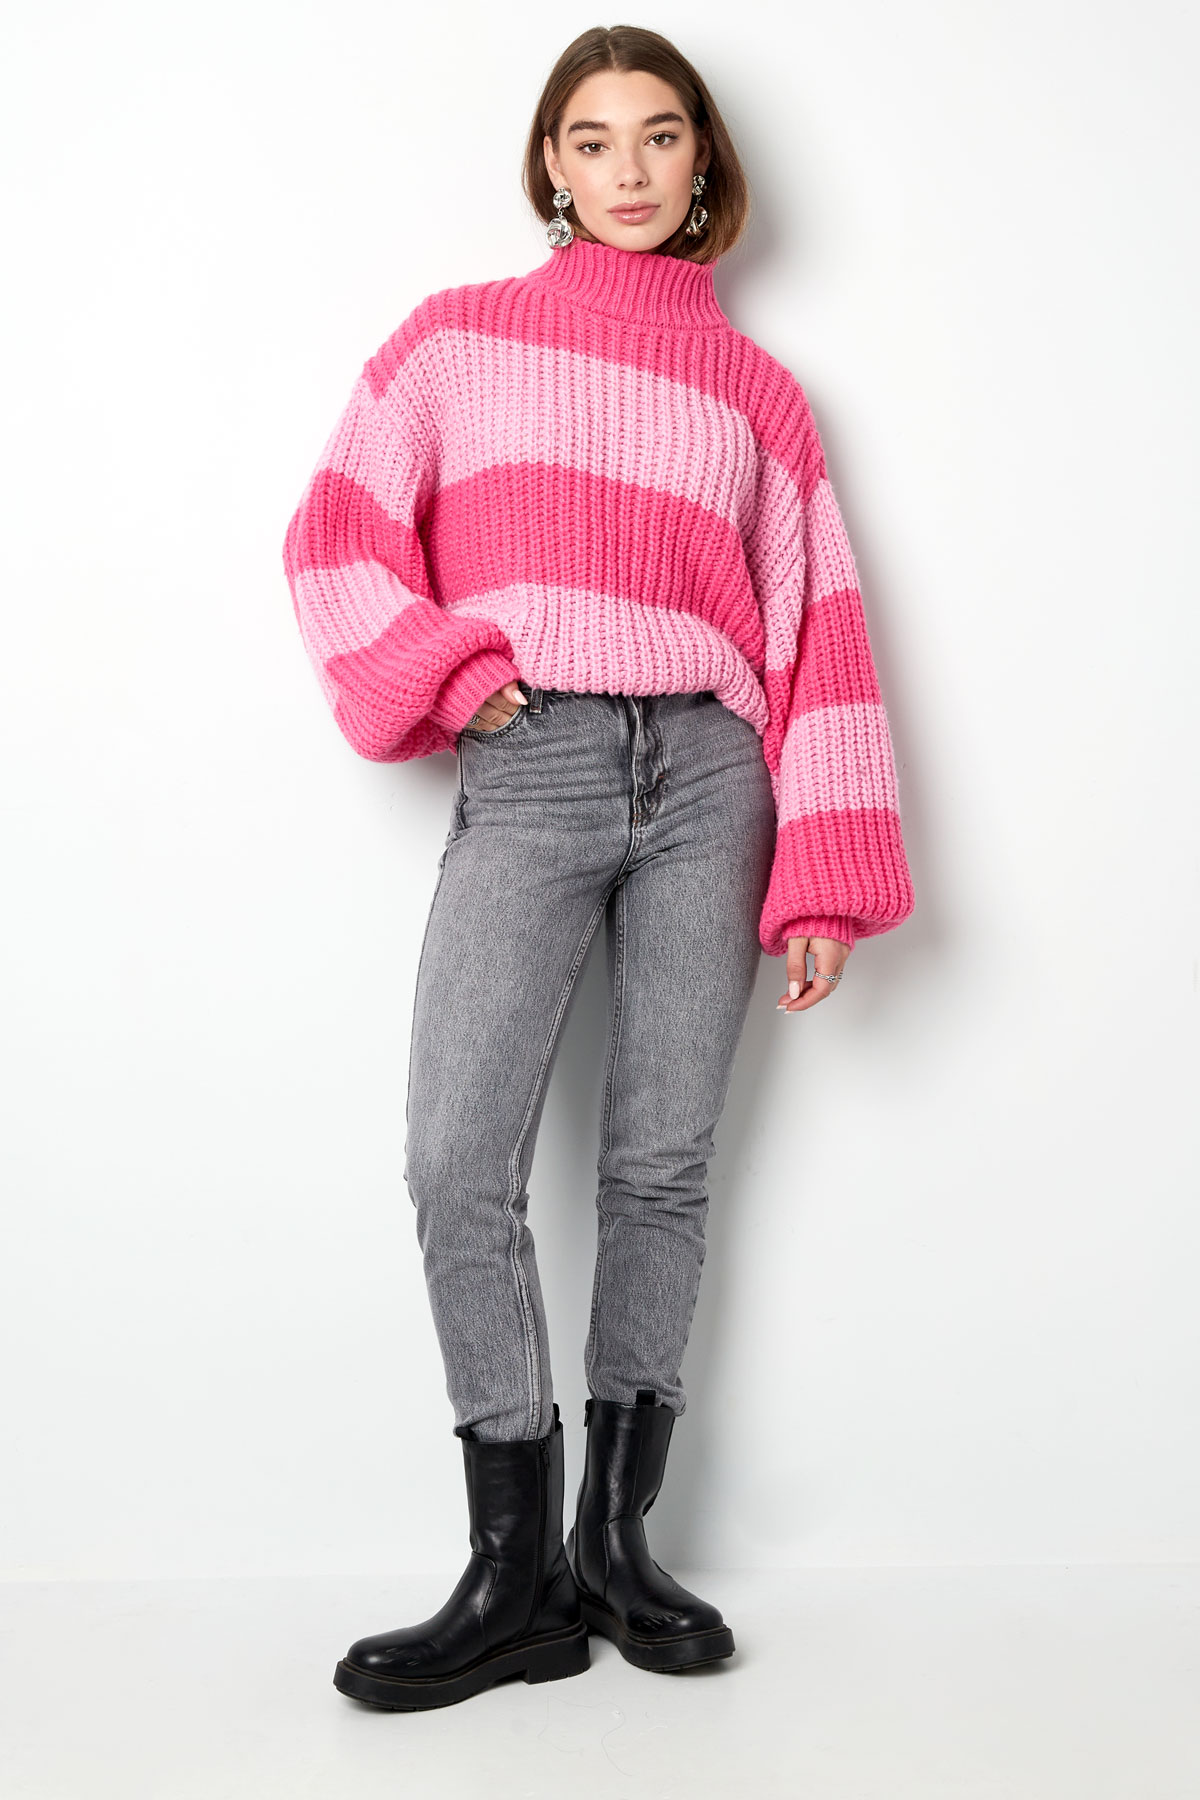 Warm knitted striped sweater - black and white Picture6